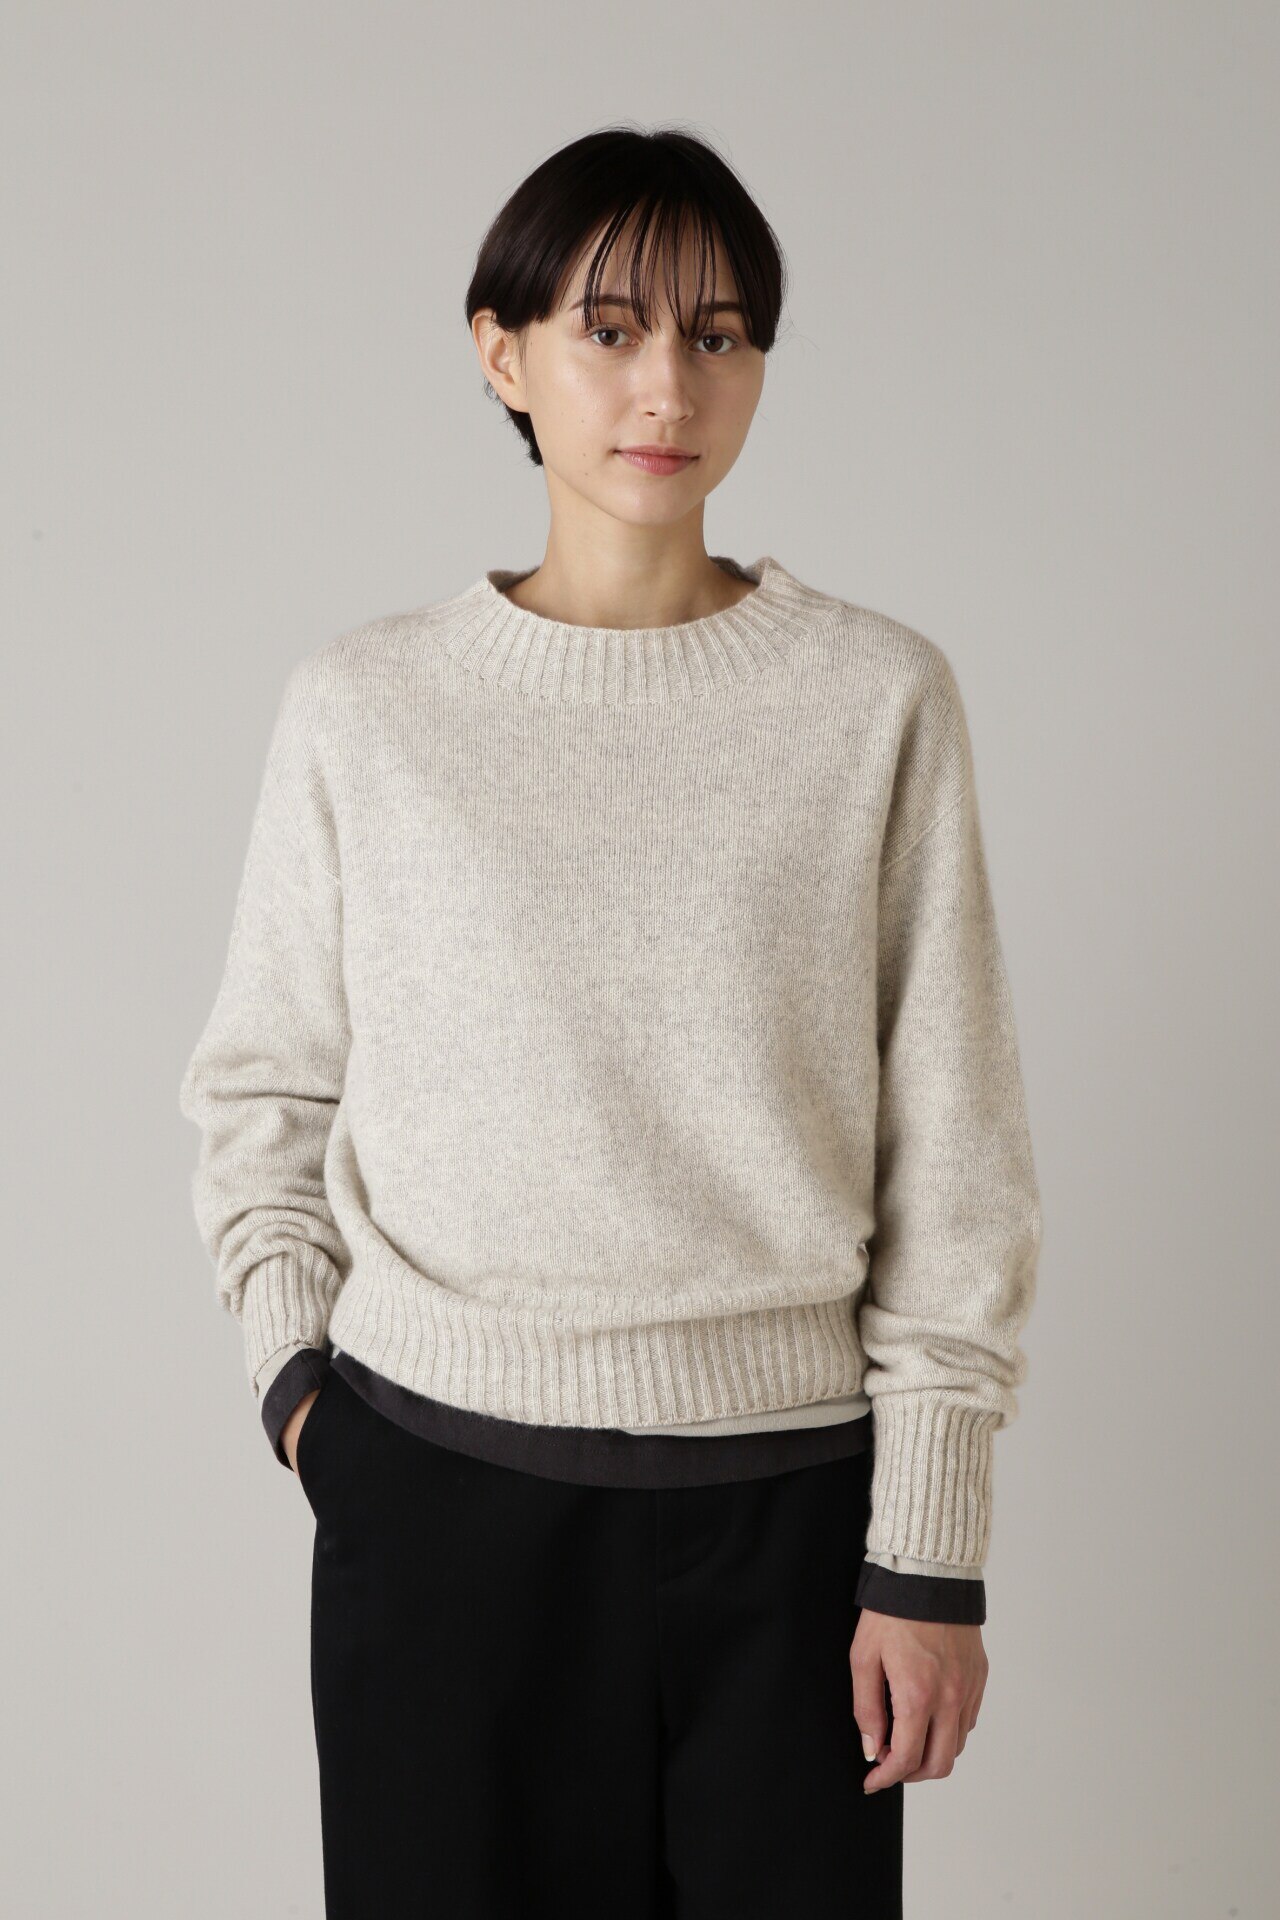 TWISTED CASHMERE WOOL|MARGARET HOWELL(マーガレット・ハウエル)の